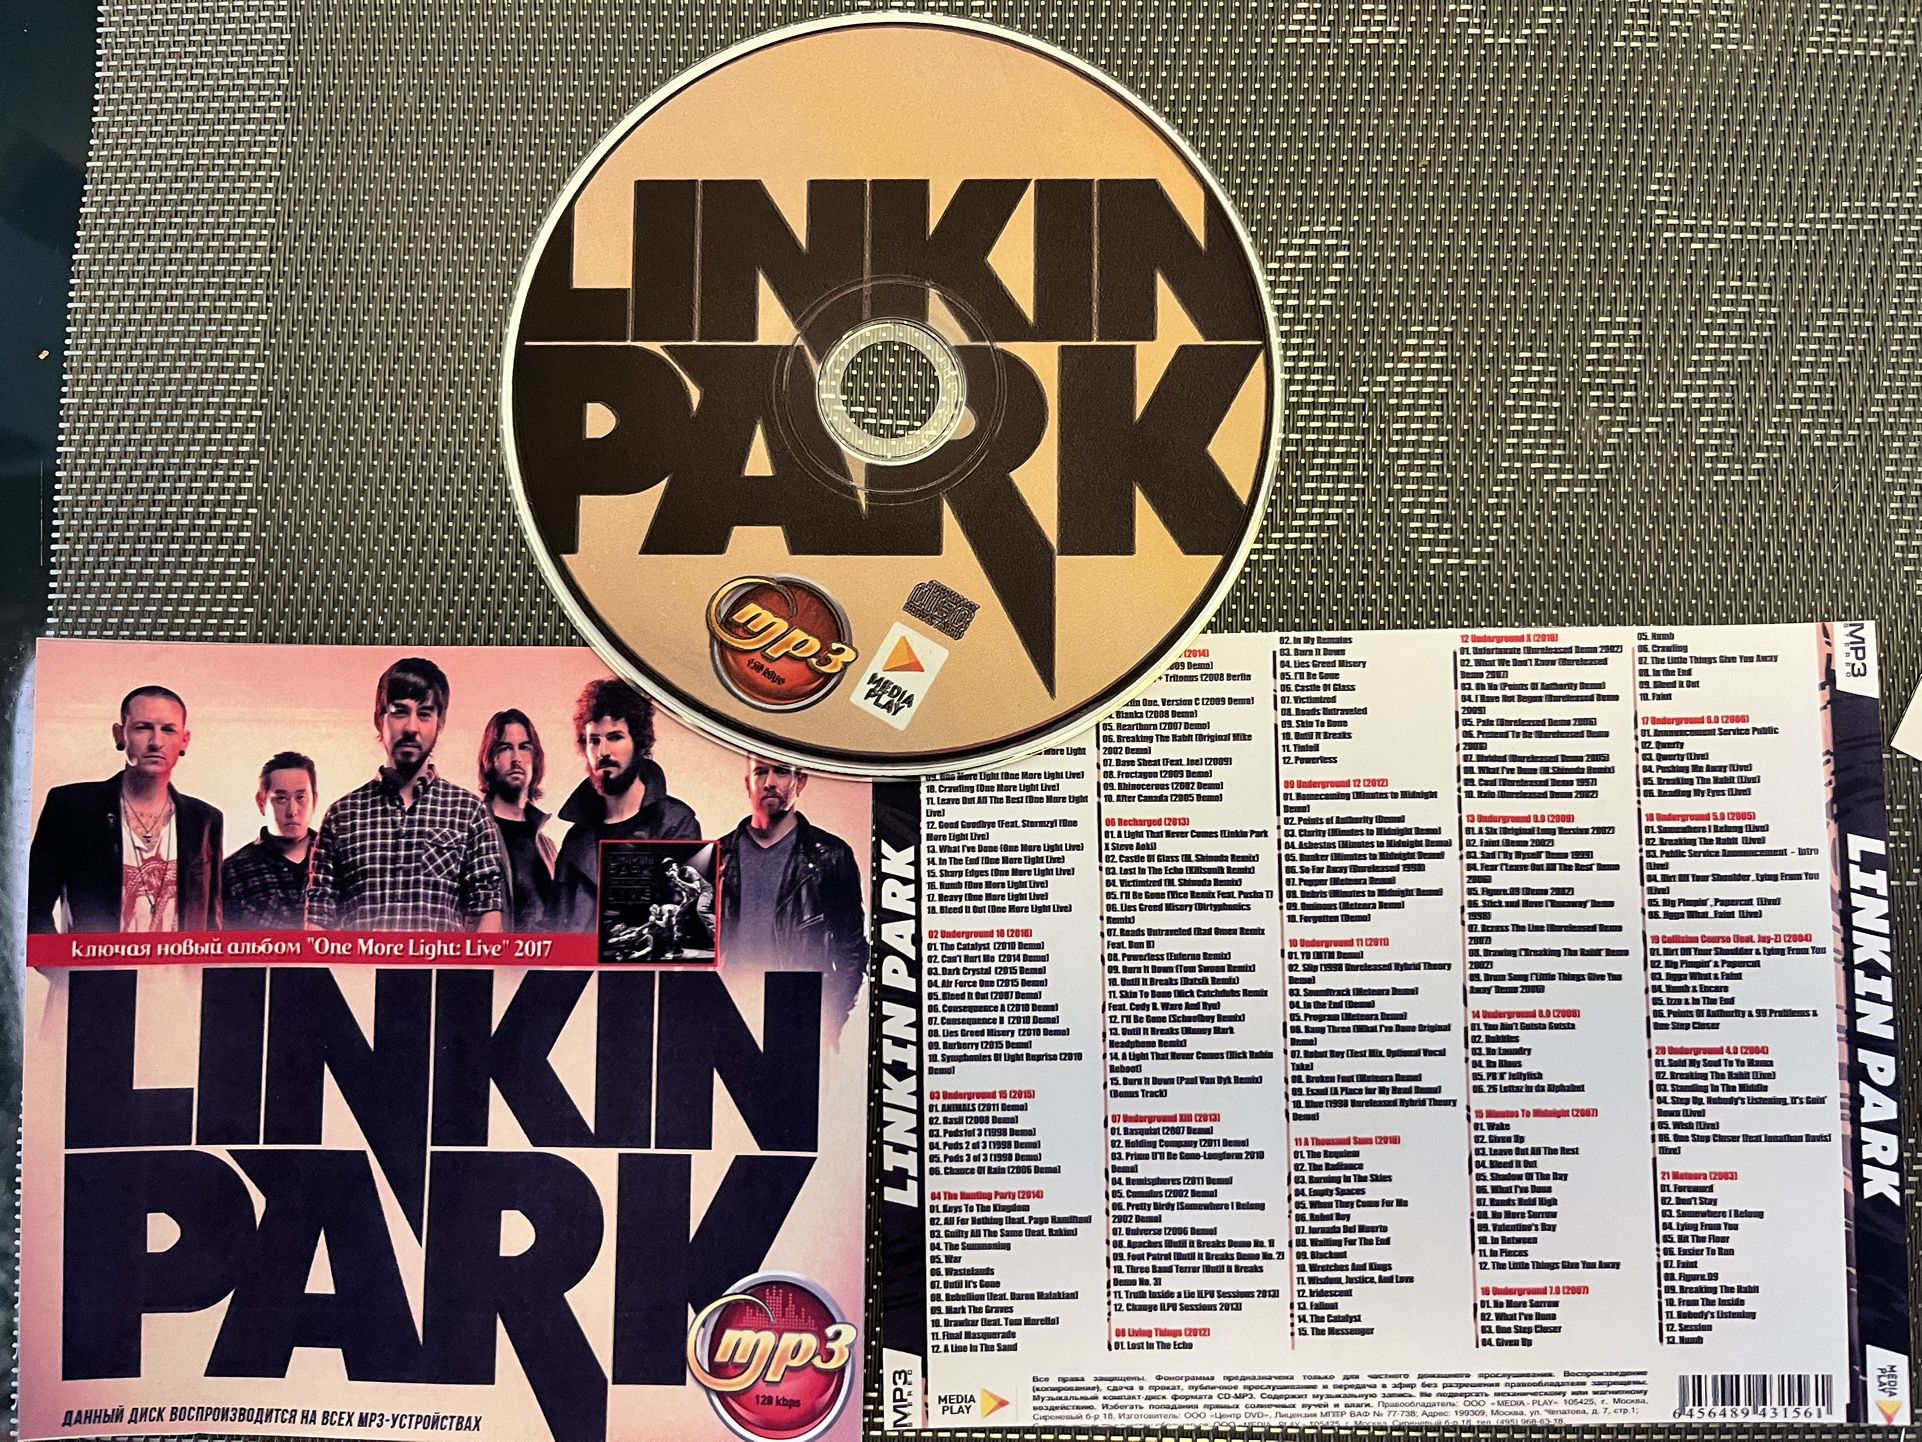 MP3 Linkin Park - The Best MP3 Albums Collection 